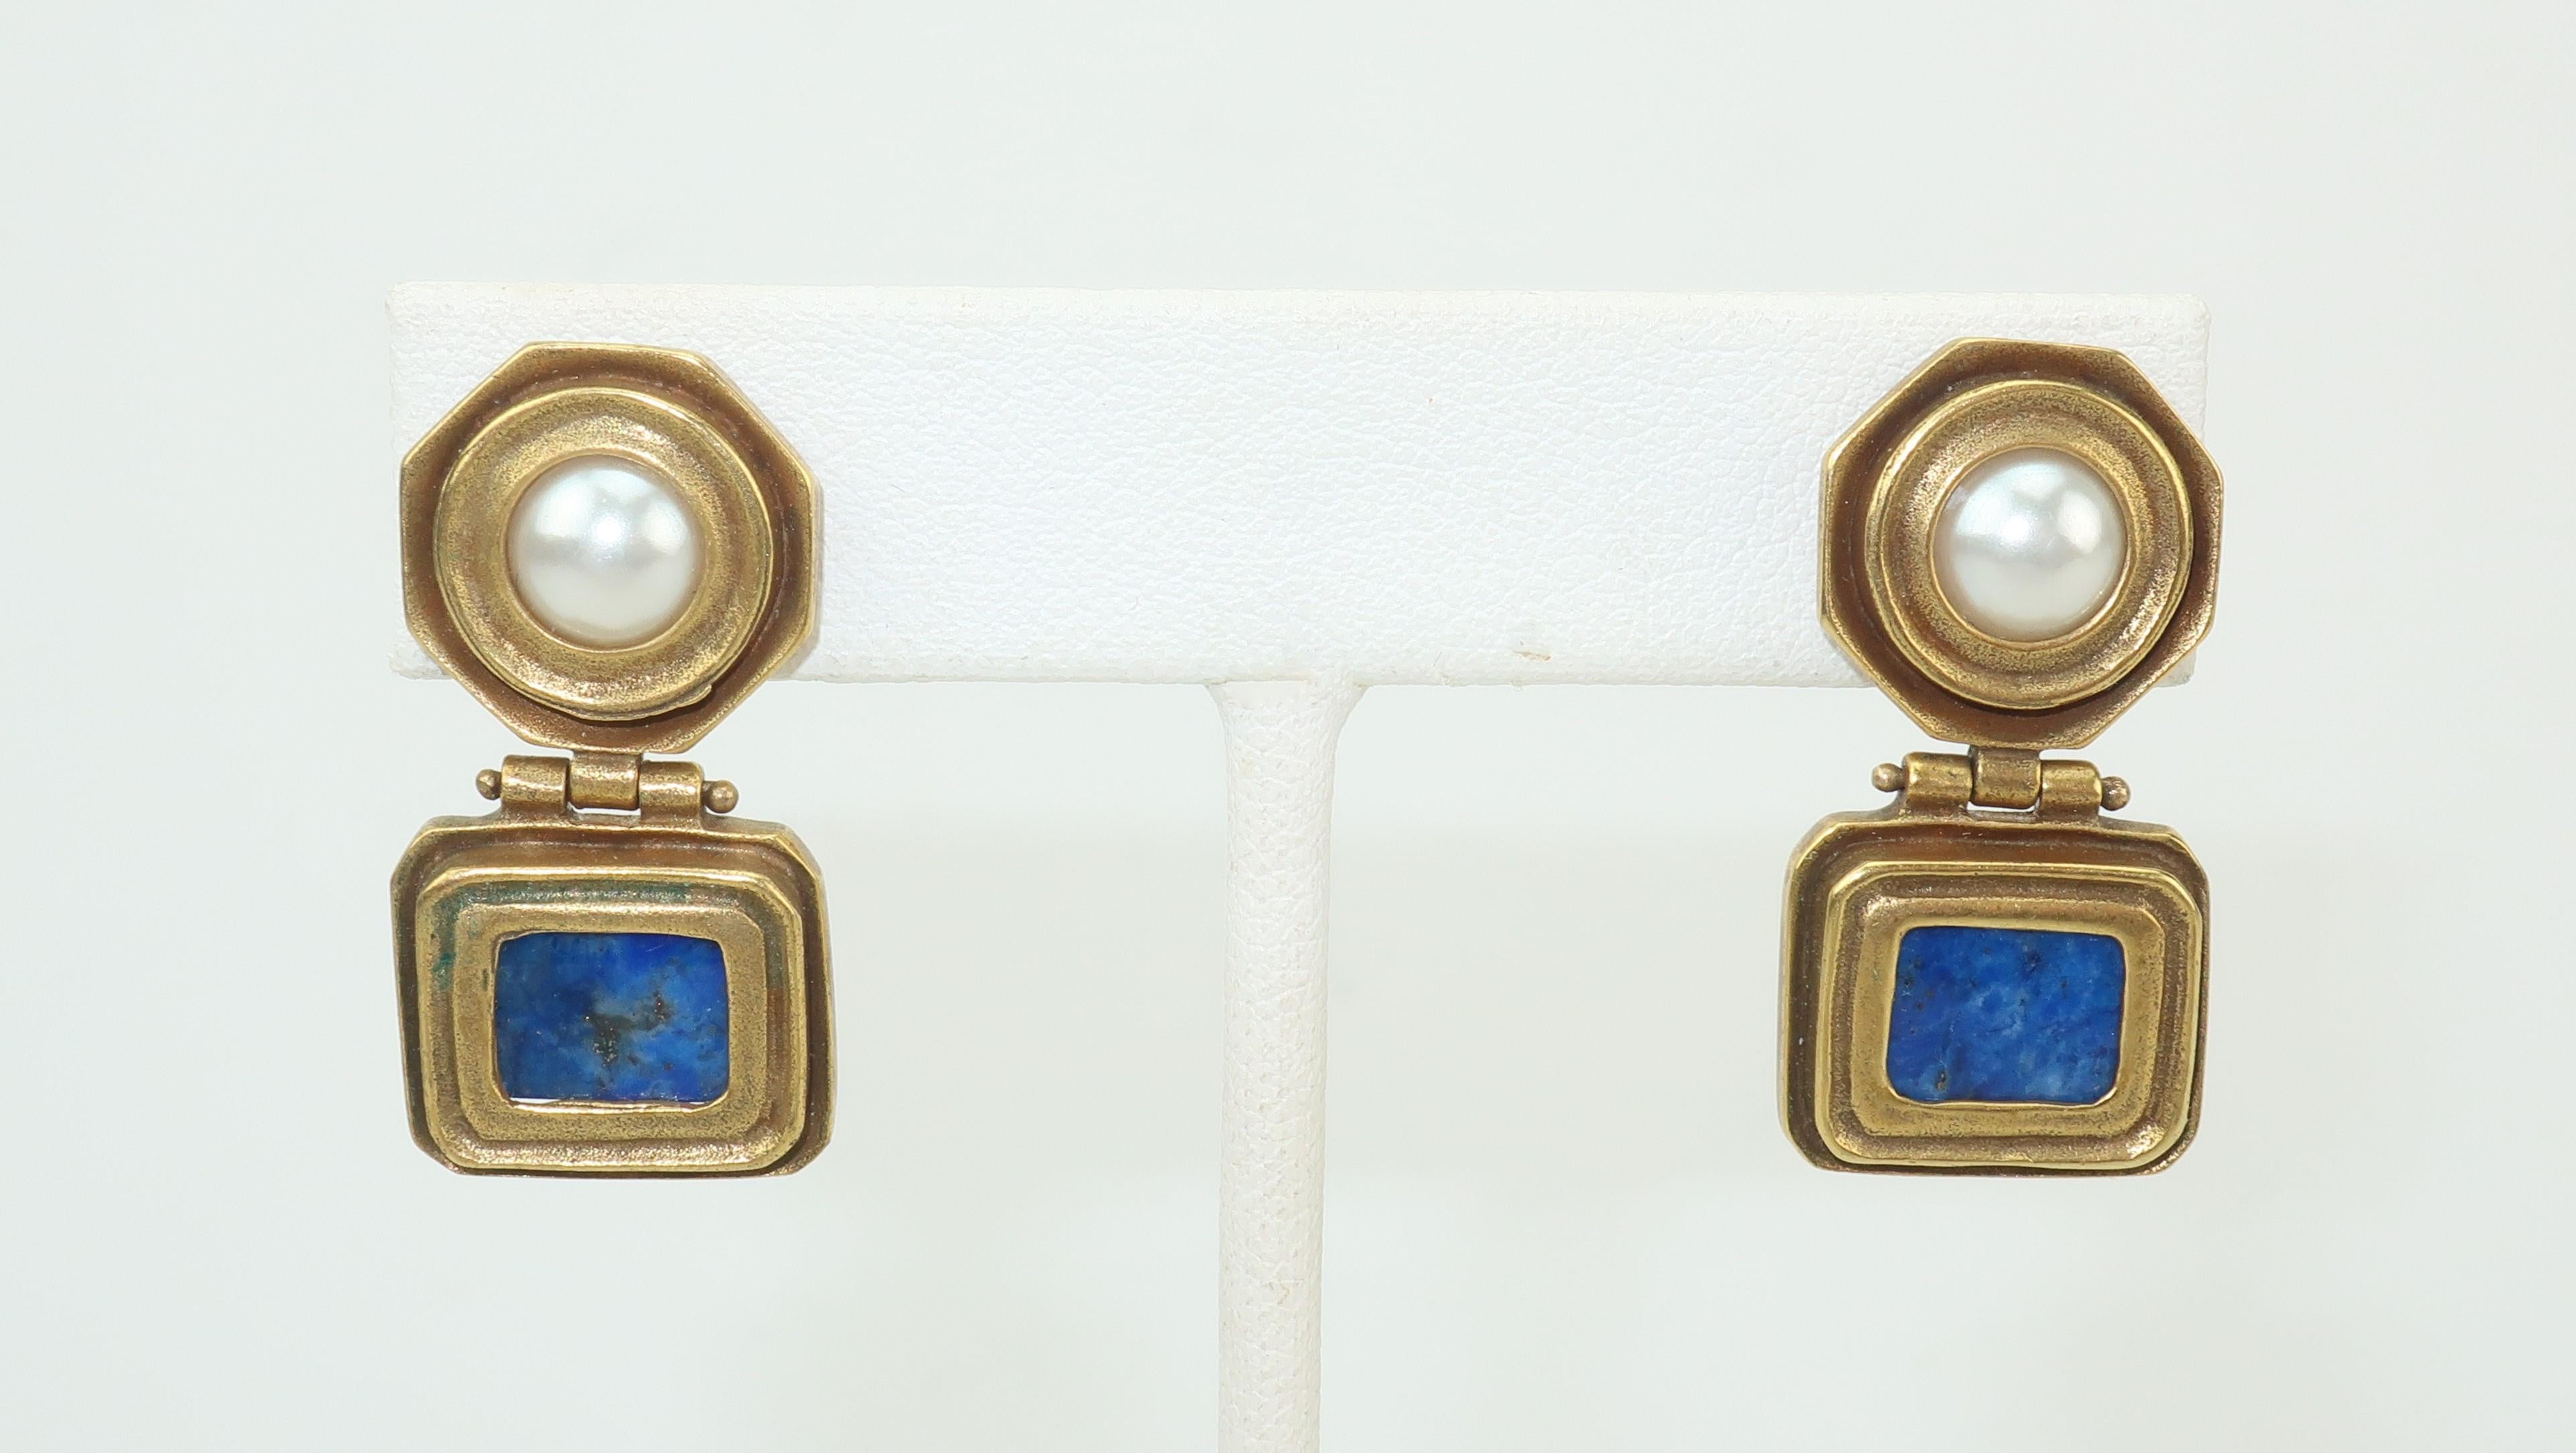 Metropolitan Museum of Art reproduction classical Roman style pierced post earrings fabricated from antiqued brass, faux pearl and lapis lazuli.  The hinged drop provides an articulated movement to the diminutive silhouette.  Each earring measures